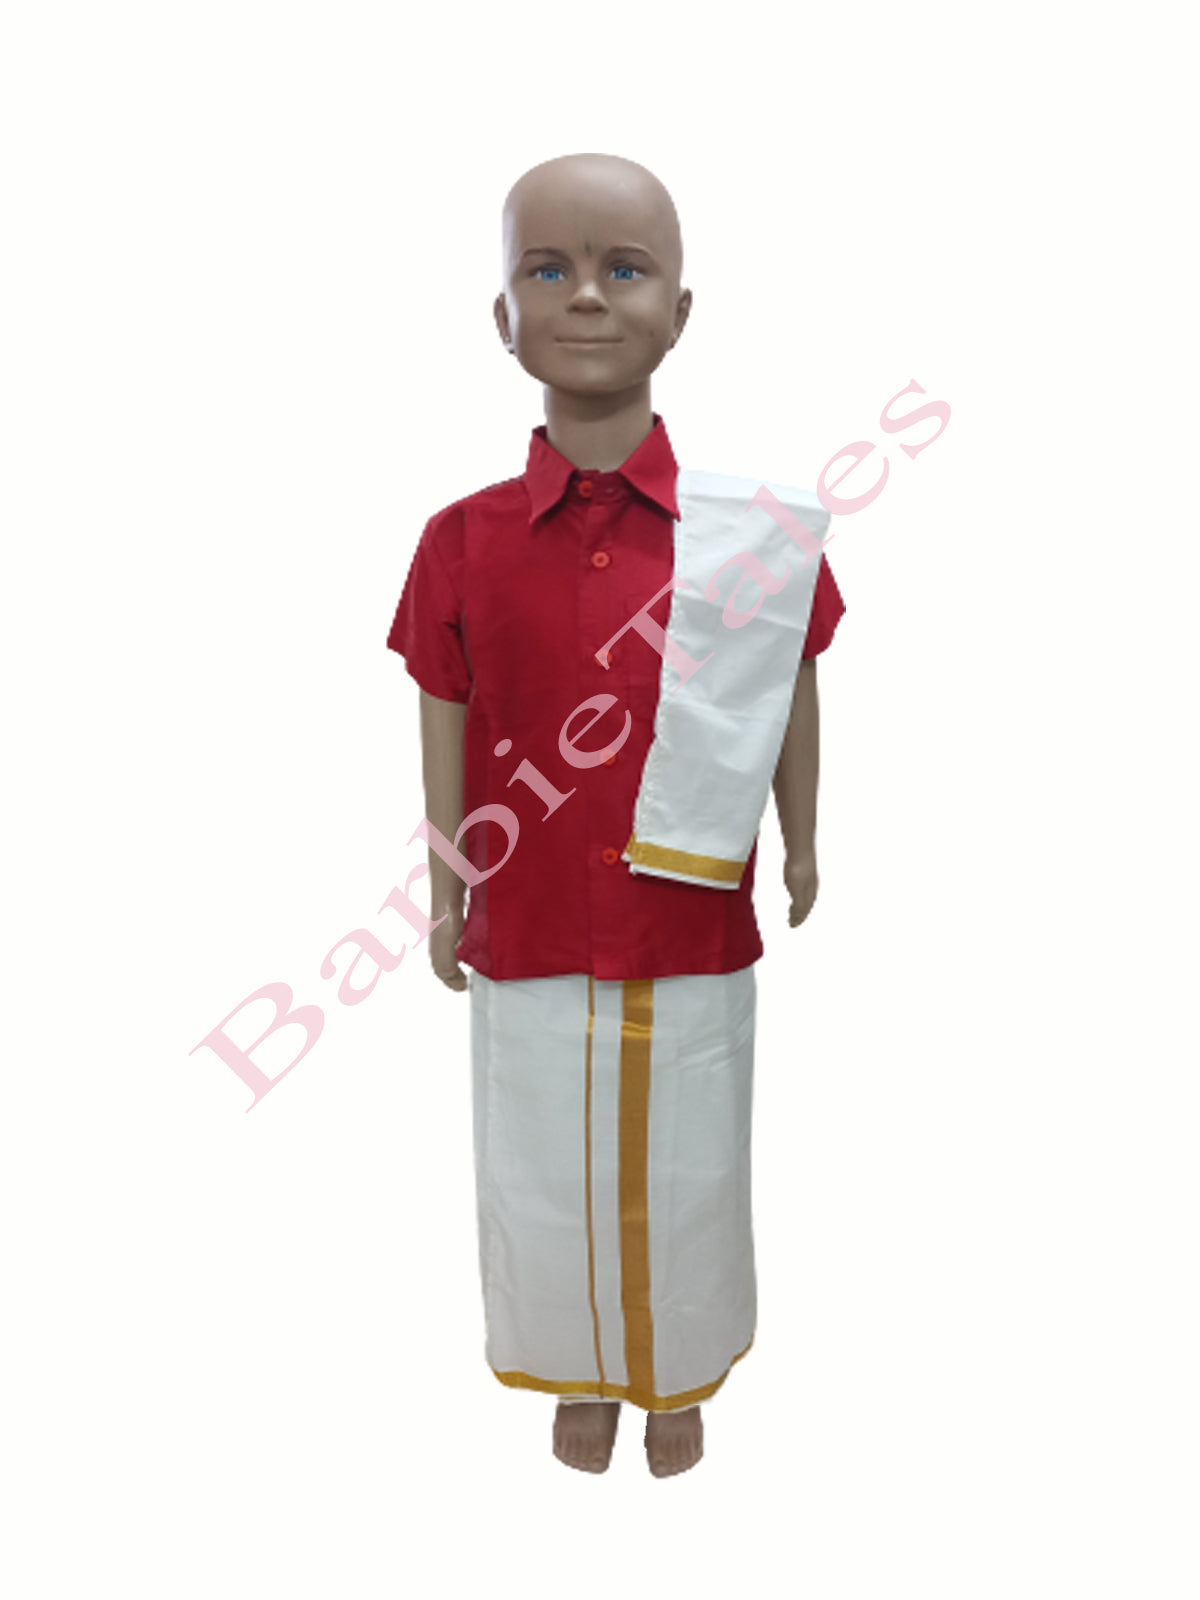 Buy BookMyCostume Kerala Indian State Onam Fancy Dress Costume for Girls  and Females 4-5 years Online at Low Prices in India - Amazon.in